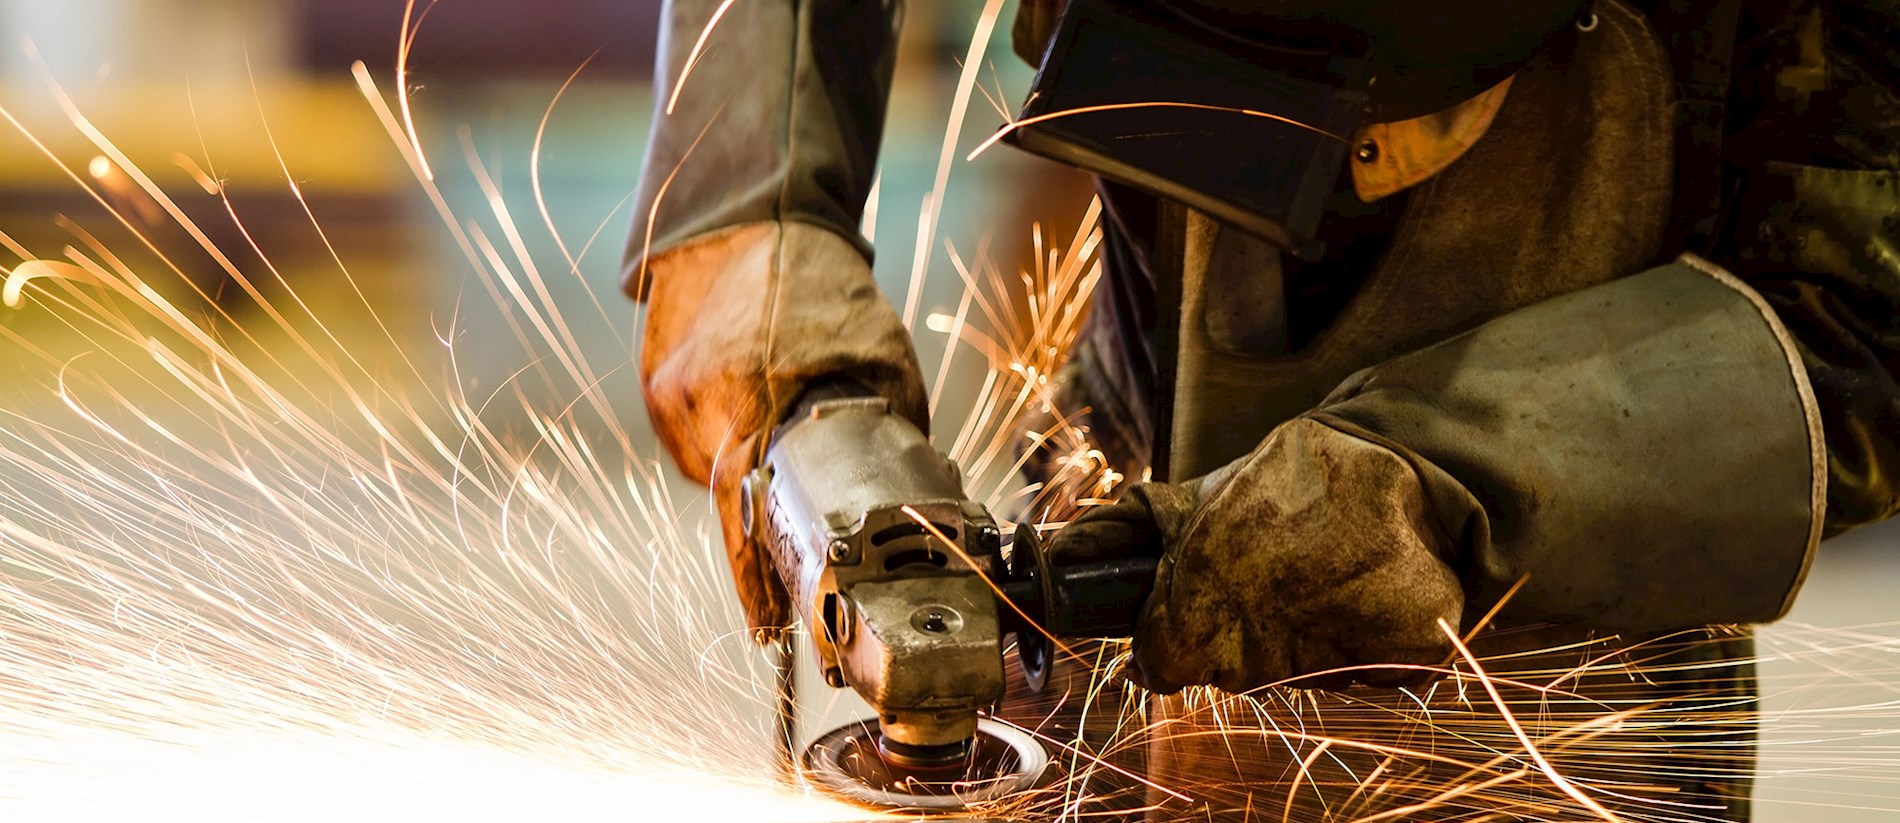 A person is grinding a piece of metal. You can see sparks. The person is wearing gloves to be safe.